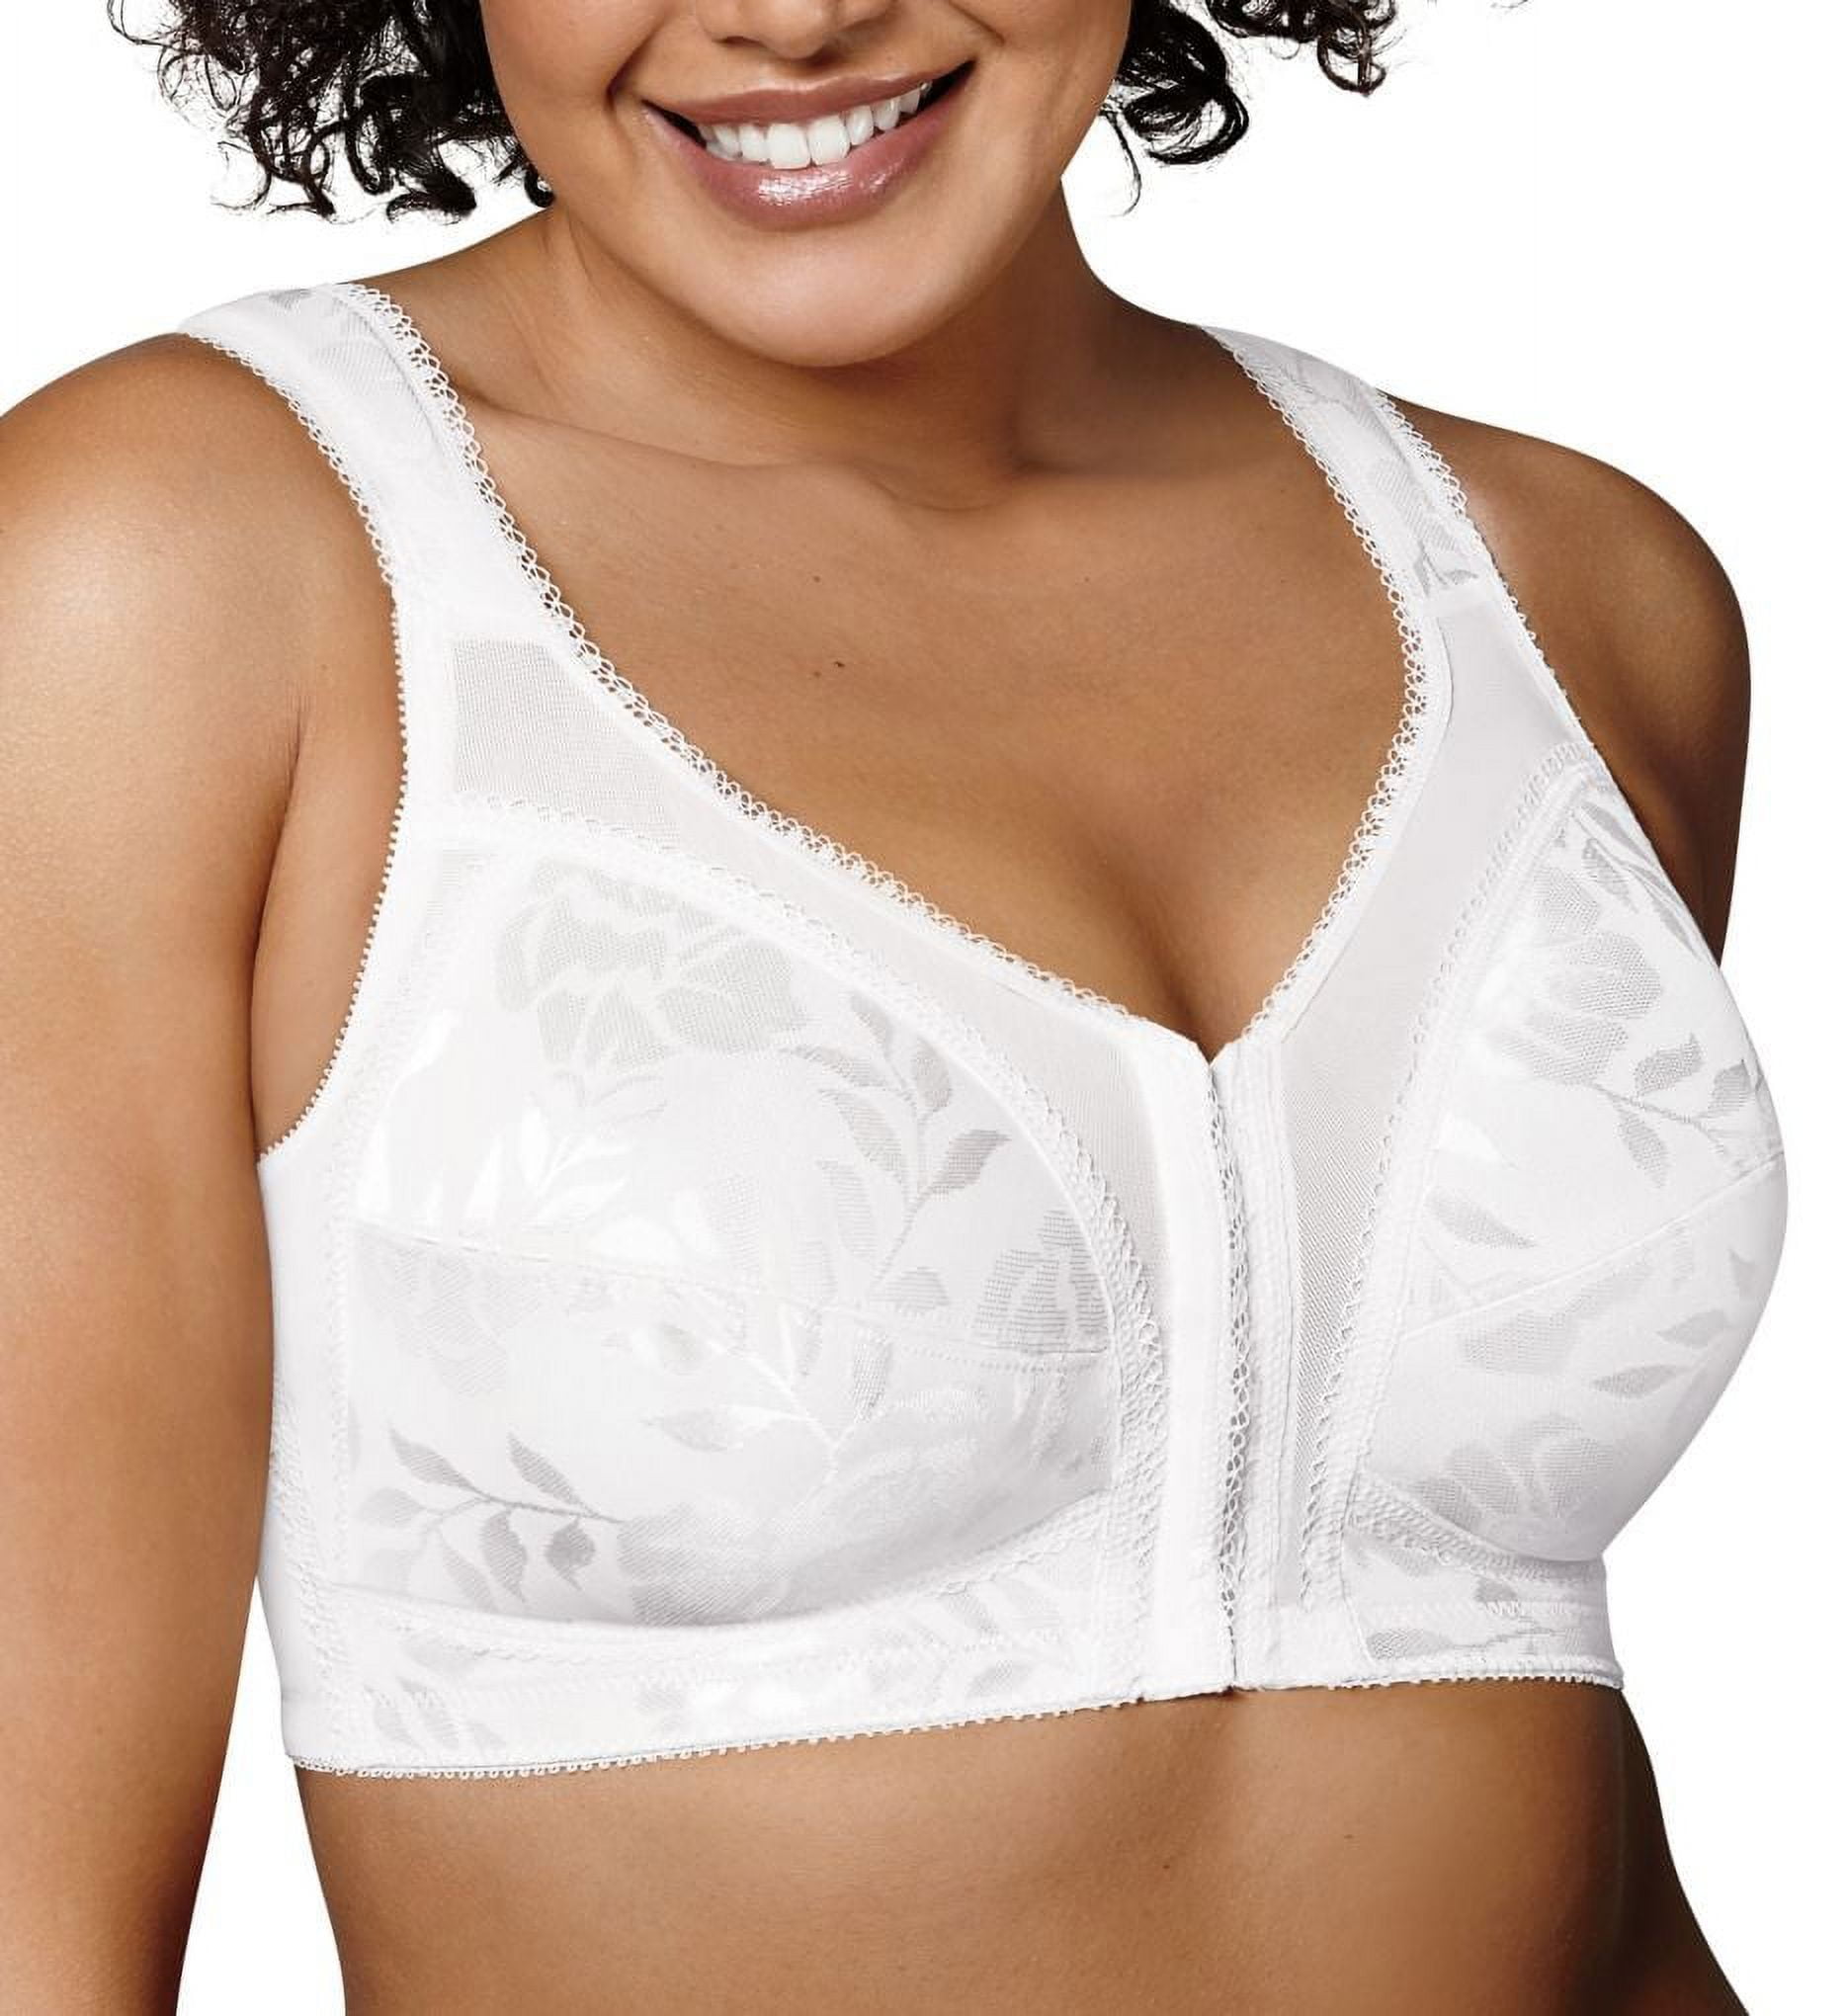 Playtex Bra 34b Style 4003 Cross Your Heart Lined 190102 for sale